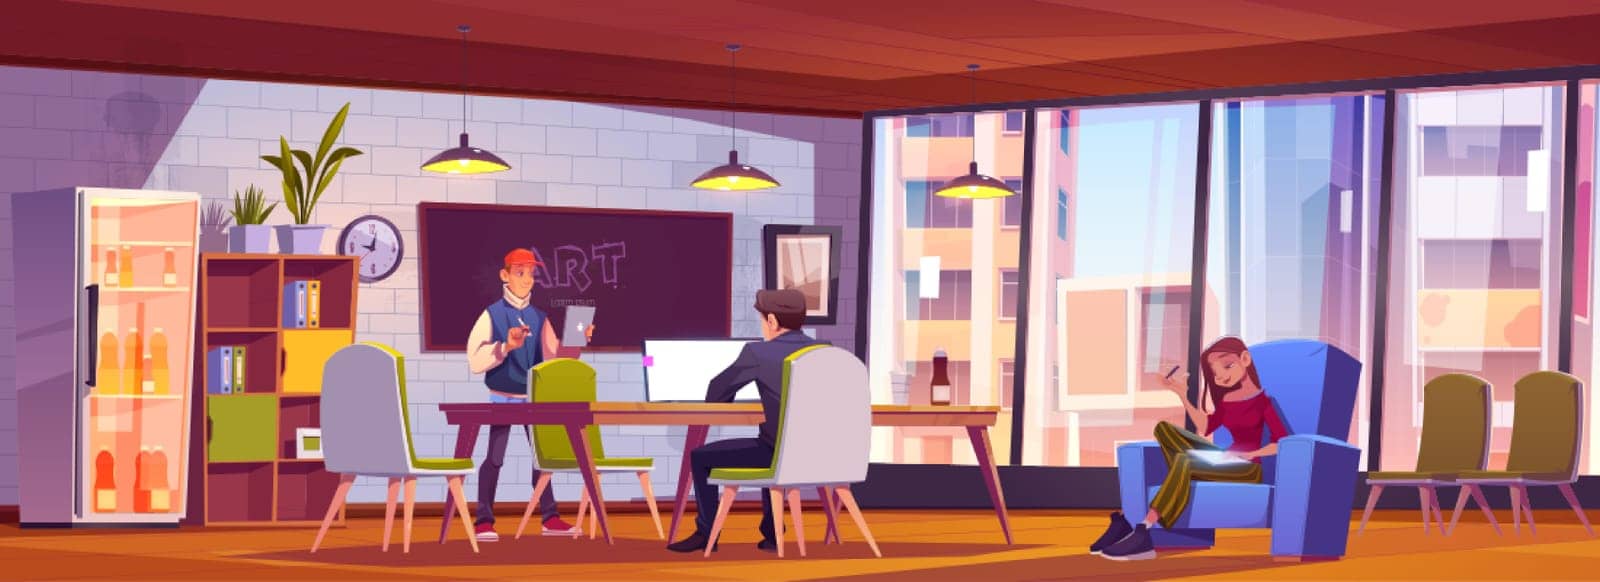 People in loft coworking office develop business idea or art project, teamwork, brainstorm concept. Relaxed creative team sitting at desk and armchairs in working space, Cartoon vector illustration